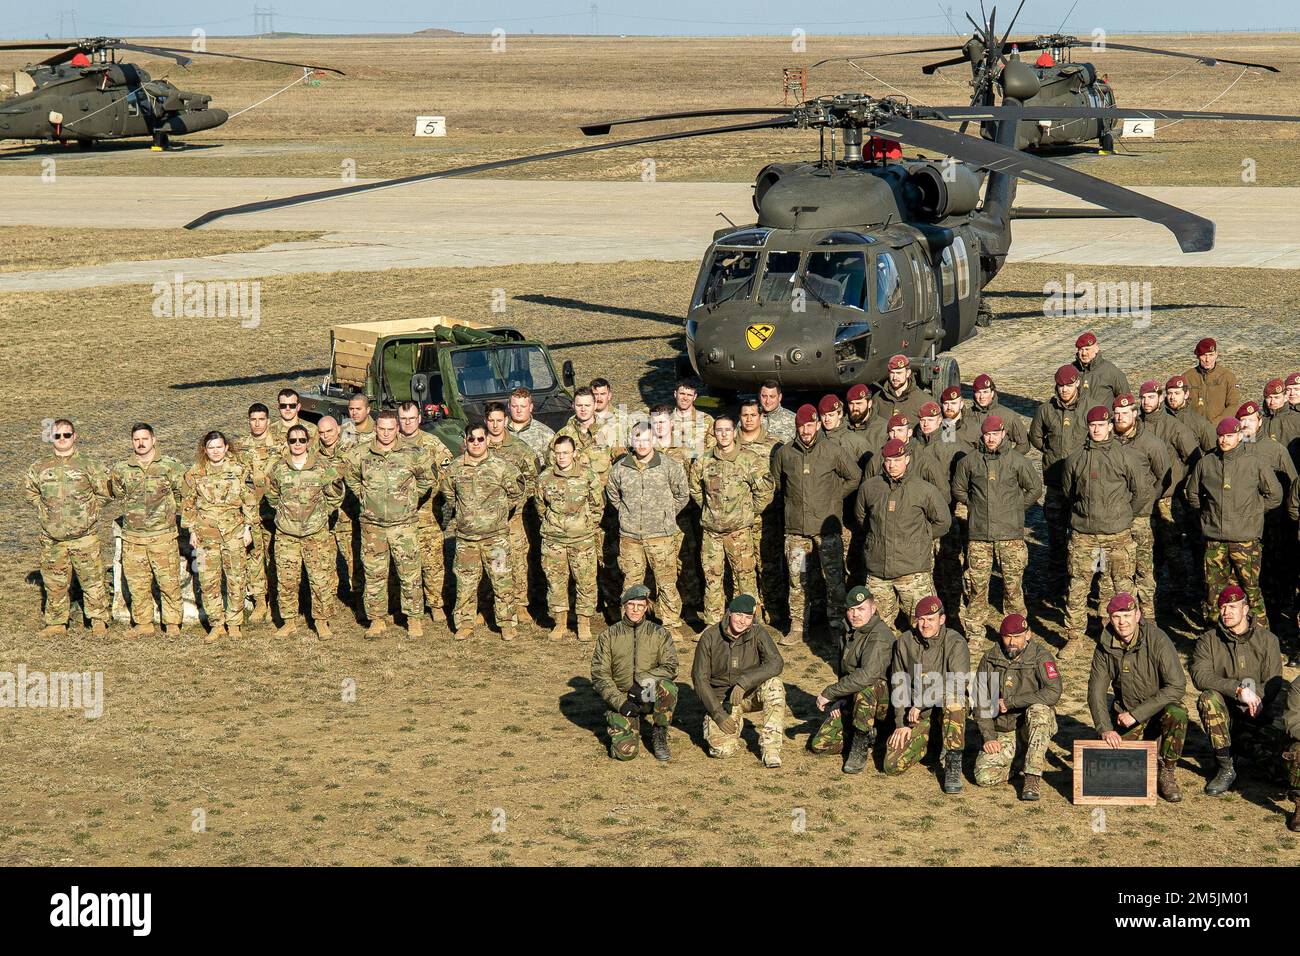 MIHAIL KOGALNICEANU AIR BASE, Romania –Bravo Company, 3rd Battalion, 227th Aviation Regiment poses for a photo with the Royal Netherlands 11th Air Assault Brigade following the completion of Exercise Rapid Falcon, MK Air Base, Romania, March 19, 2022.    1st Air Cavalry Brigade and Dutch 11th Air Assault Brigade worked together for sling load and air assault training during Rapid Falcon to increase interoperability and strengthen the NATO alliance. Stock Photo